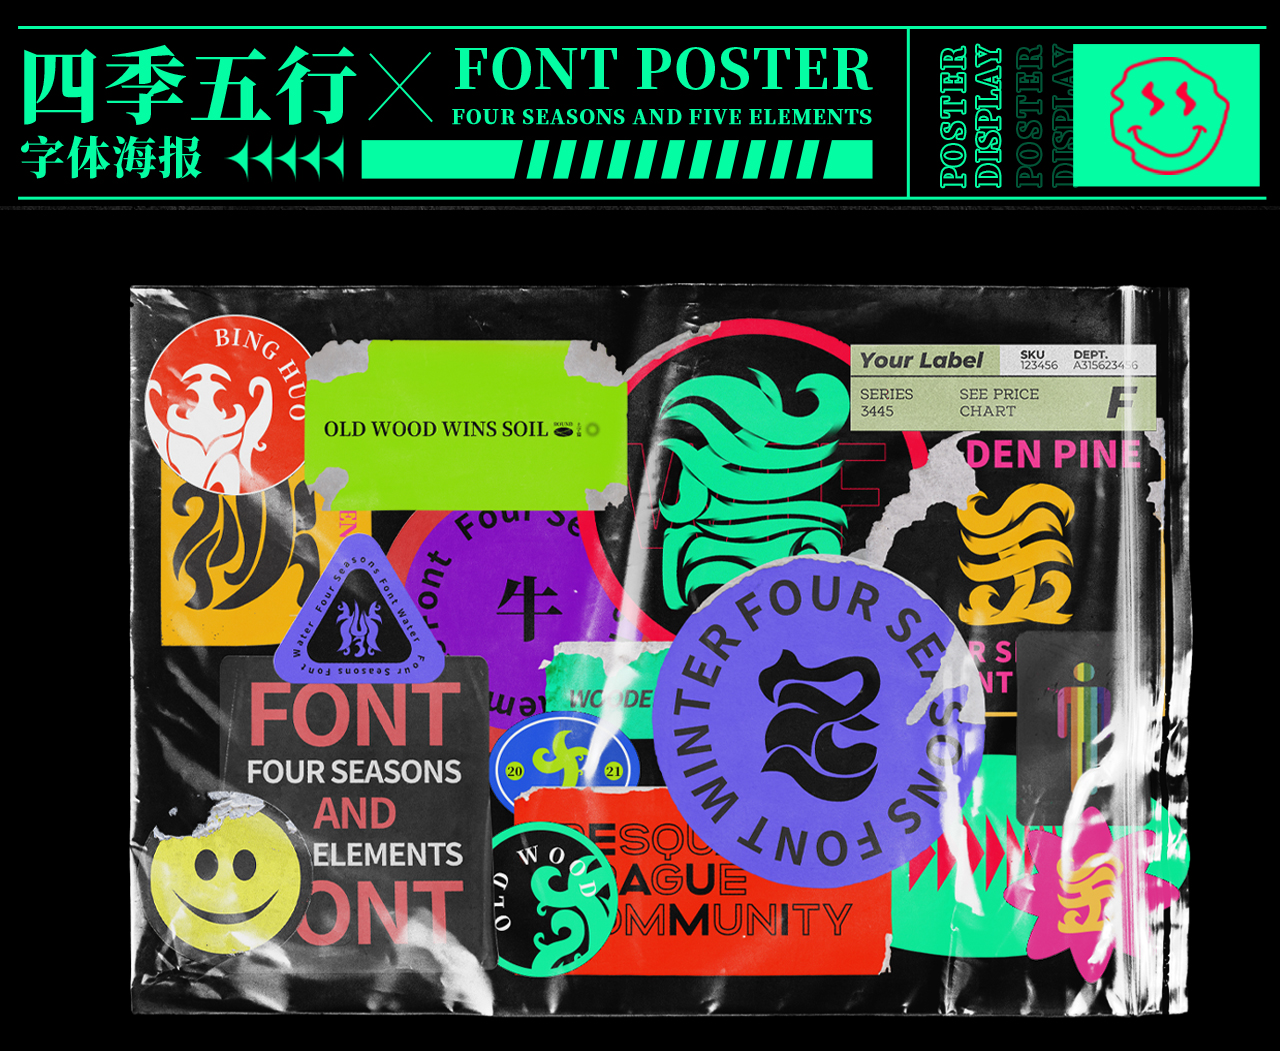 21P Collection of the latest Chinese font design schemes in 2021 #.511